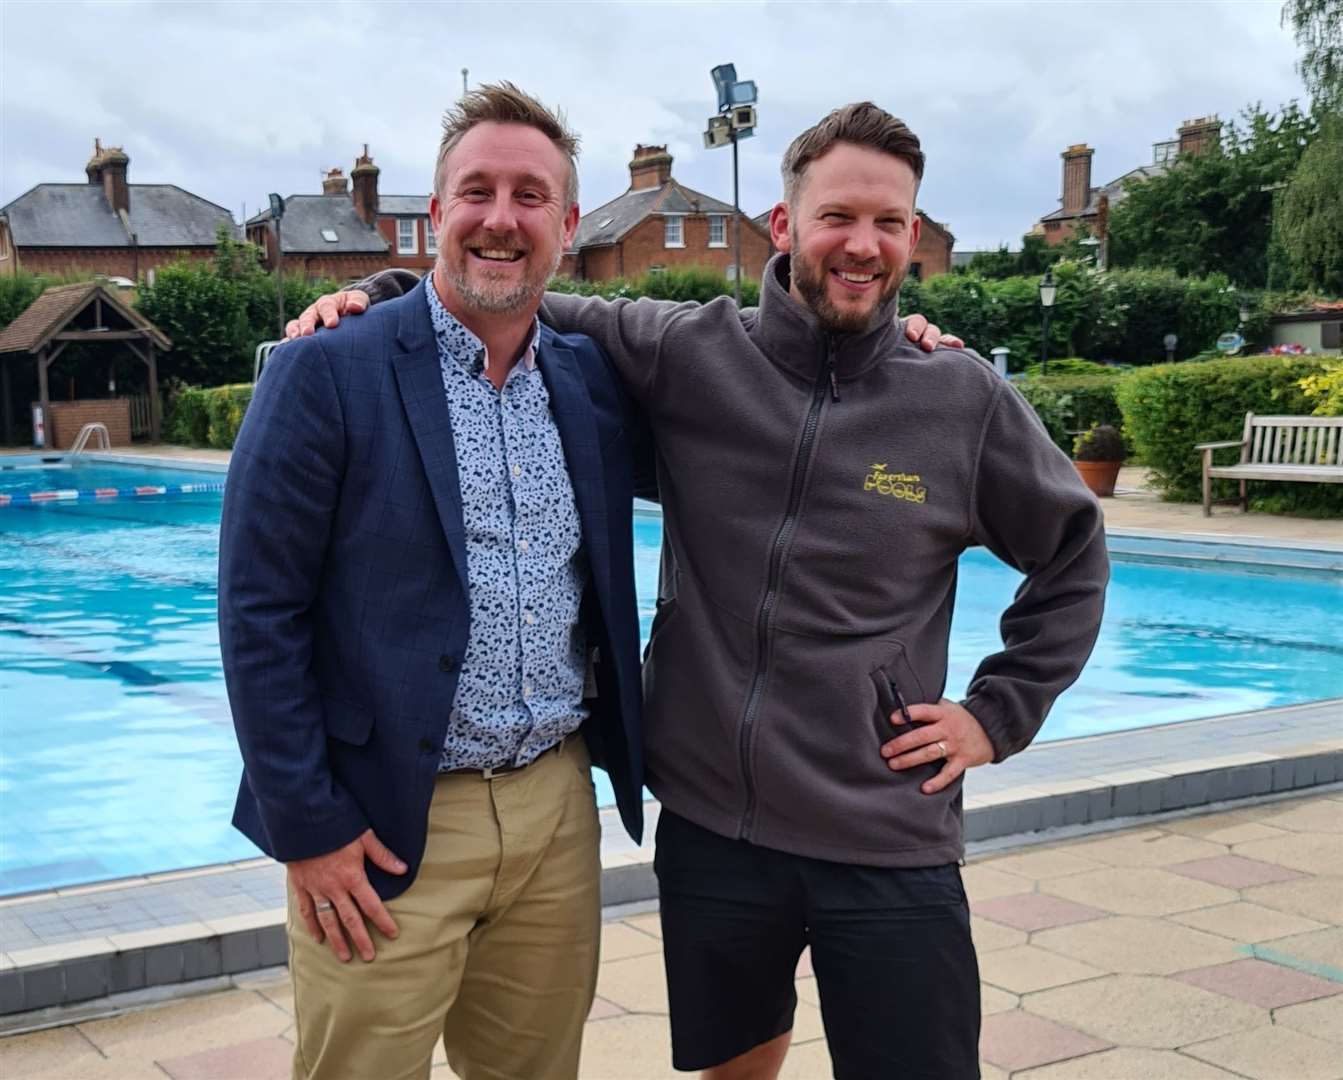 (Left to right) Jon Lazenby and Dean Butcher, who are the new management team at Faversham Pools. Picture: Faversham Pools